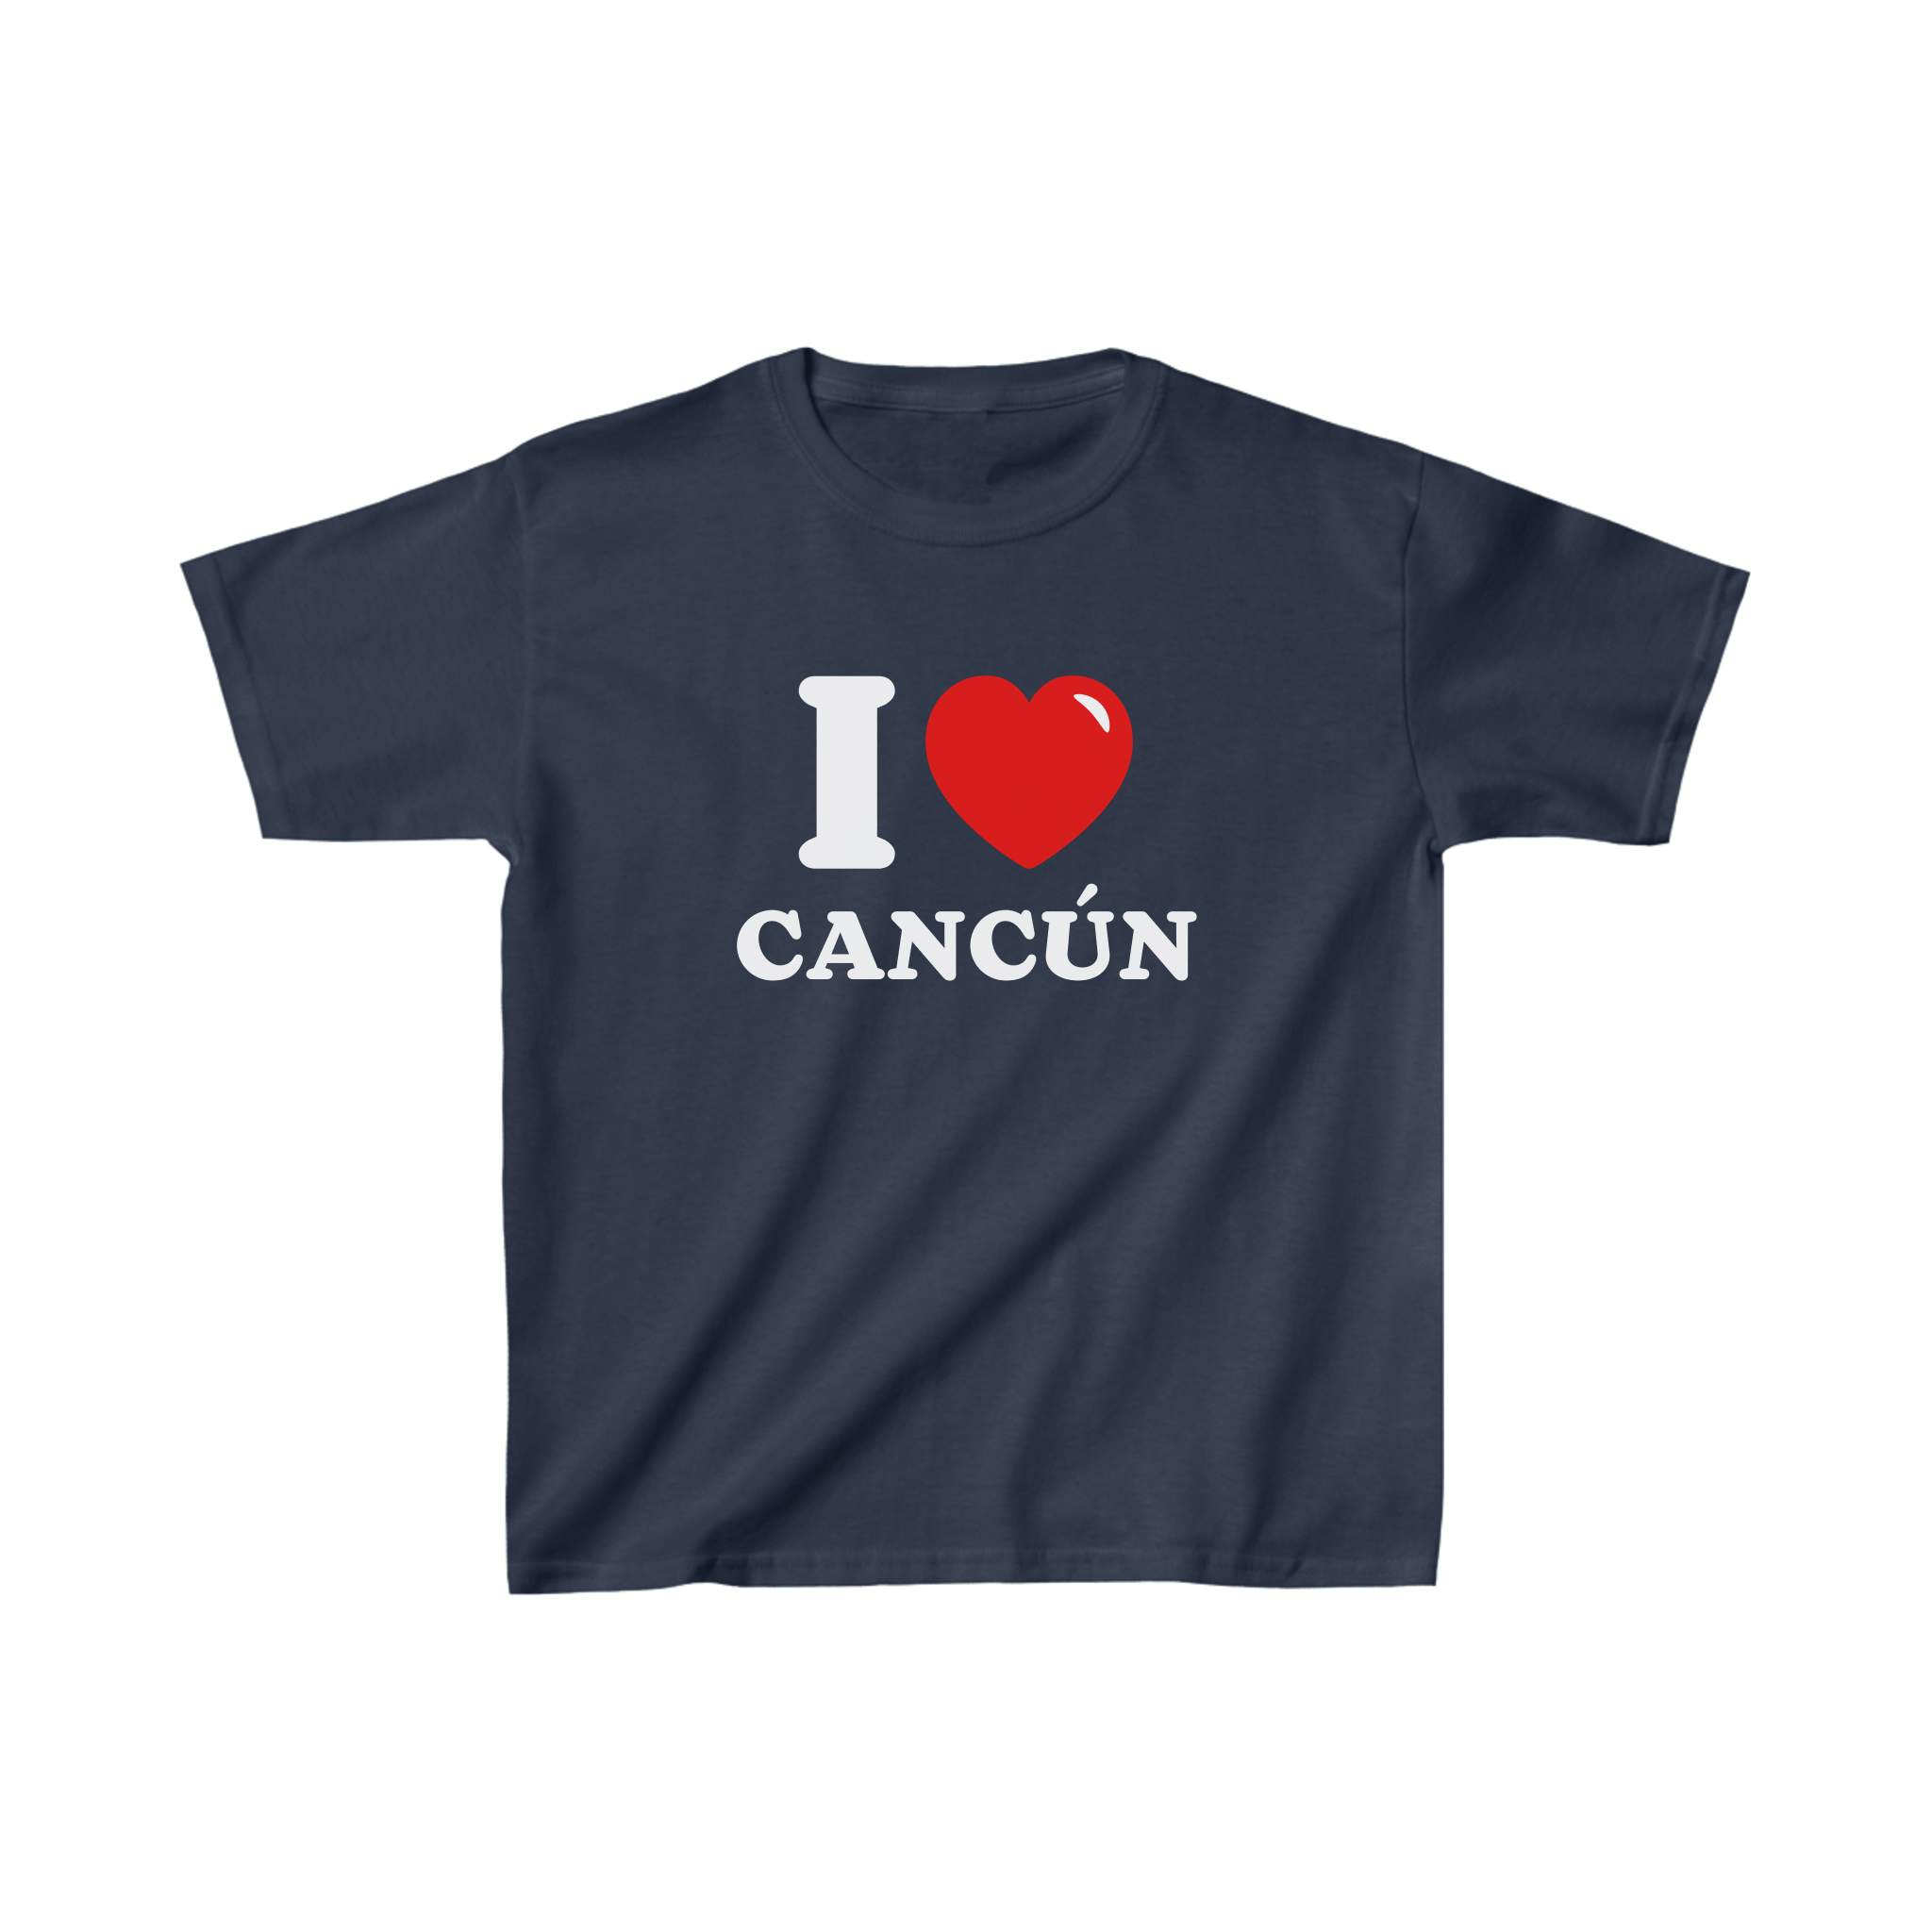 'I love Cancún' baby tee - In Print We Trust